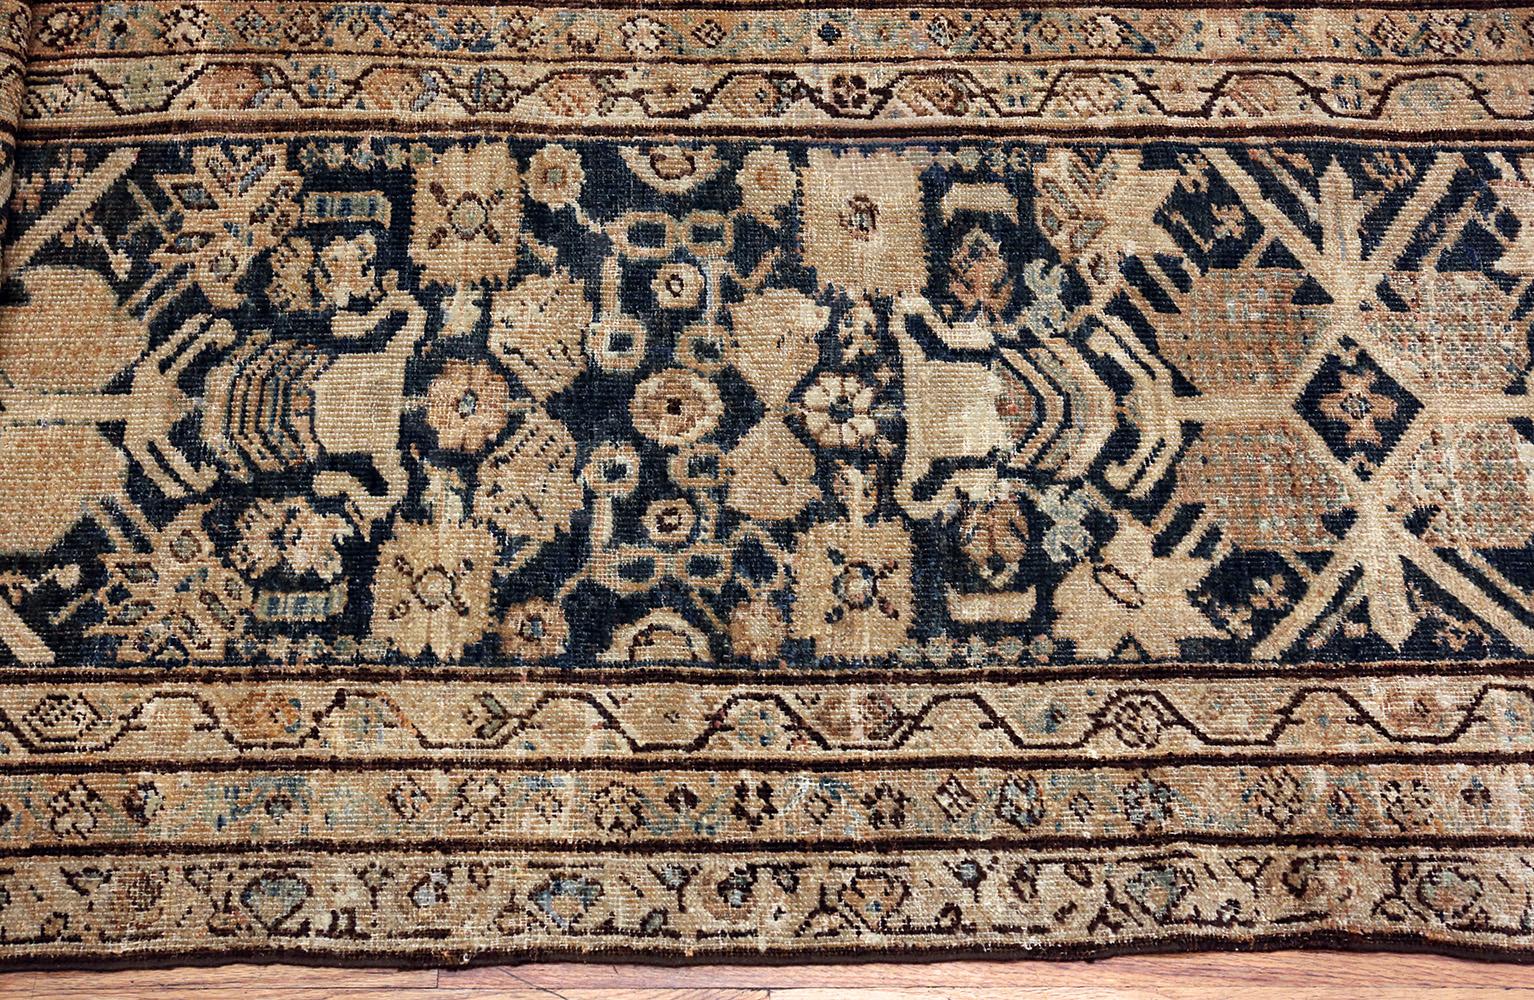 20th Century Large Oversize Antique Persian Sultanabad Rug. Size: 14 ft 6 in x 22 ft